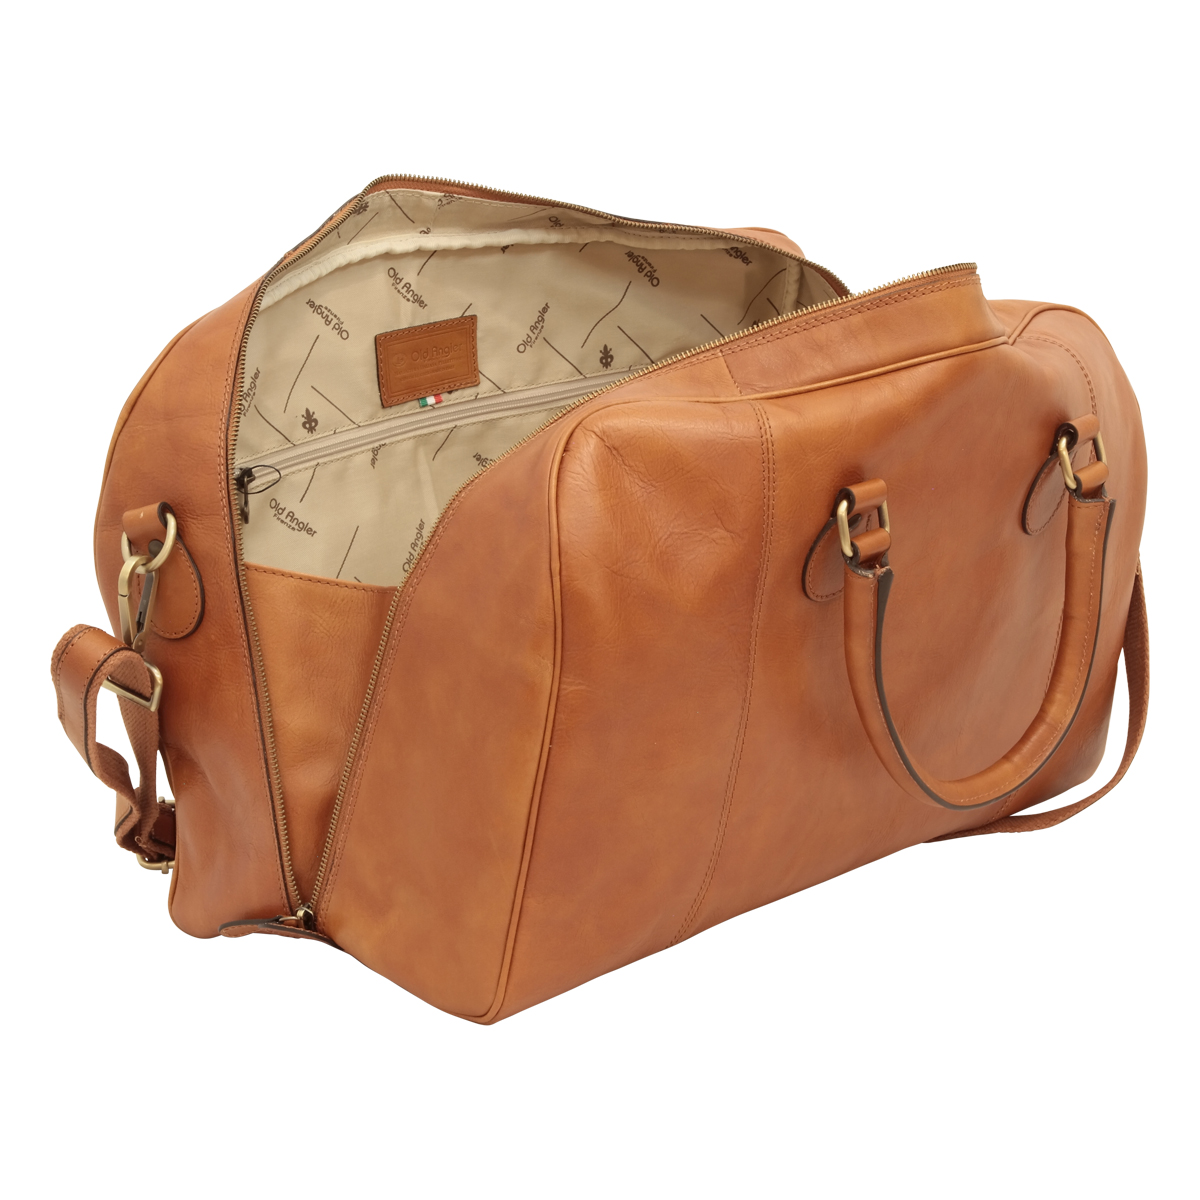 Leather Duffel Bag - Colonial | 404289CO | EURO | Old Angler Firenze